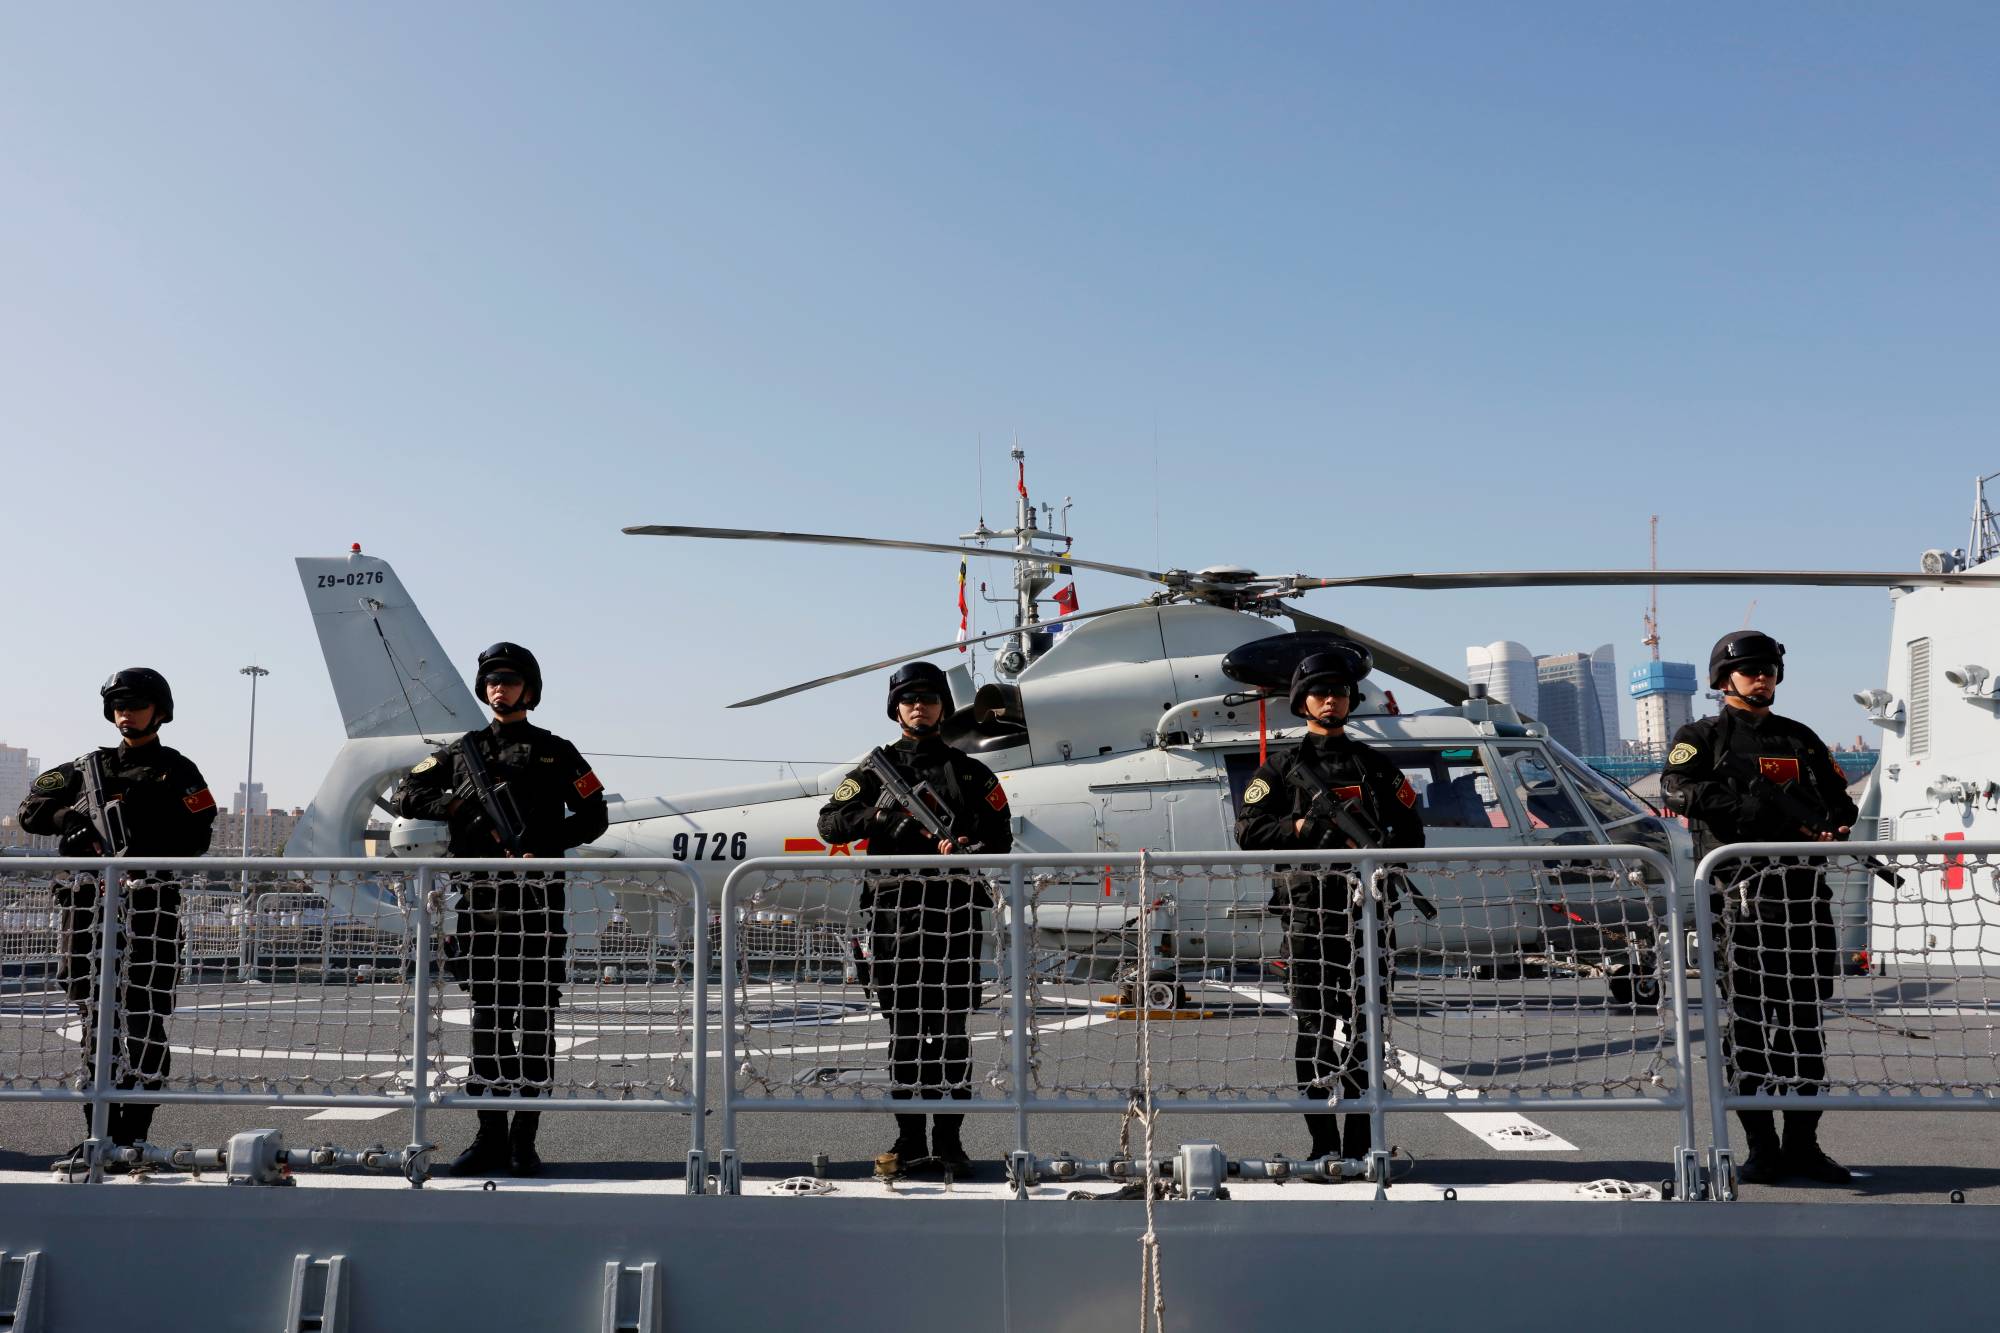 Chinese People's Liberation Army (PLA) Navy soldiers stand guard on the guided missile destroyer Xining as they depart for an escort mission in the Gulf of Aden and off the Somali coast, at a port in Qingdao, China's Shandong province, in August 2019. | REUTERS